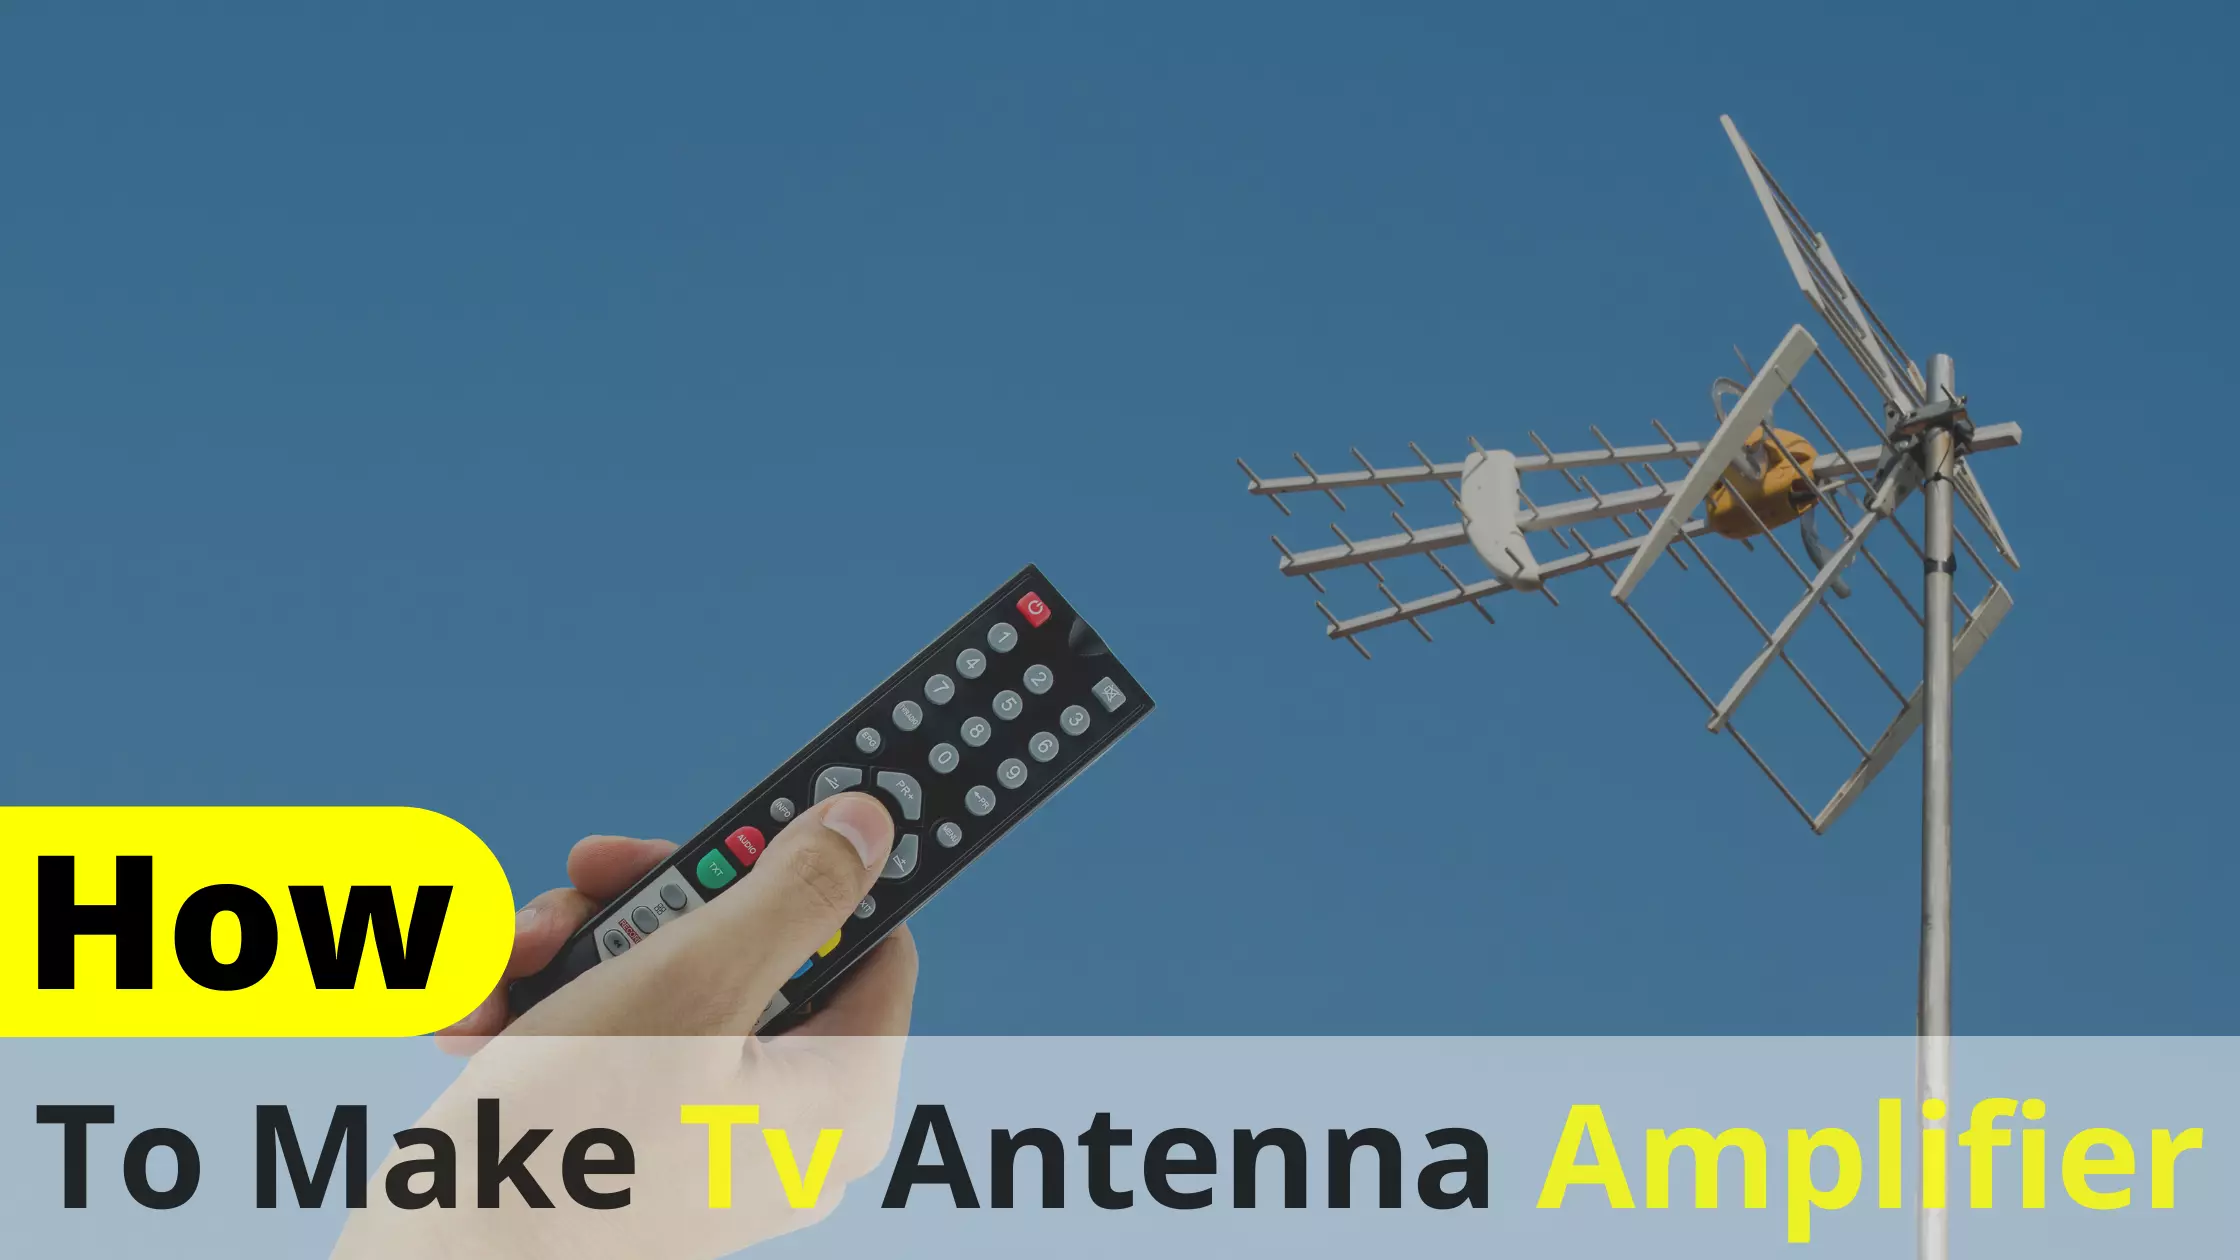 How to Make a TV Antenna Amplifier - Step by Step Guide